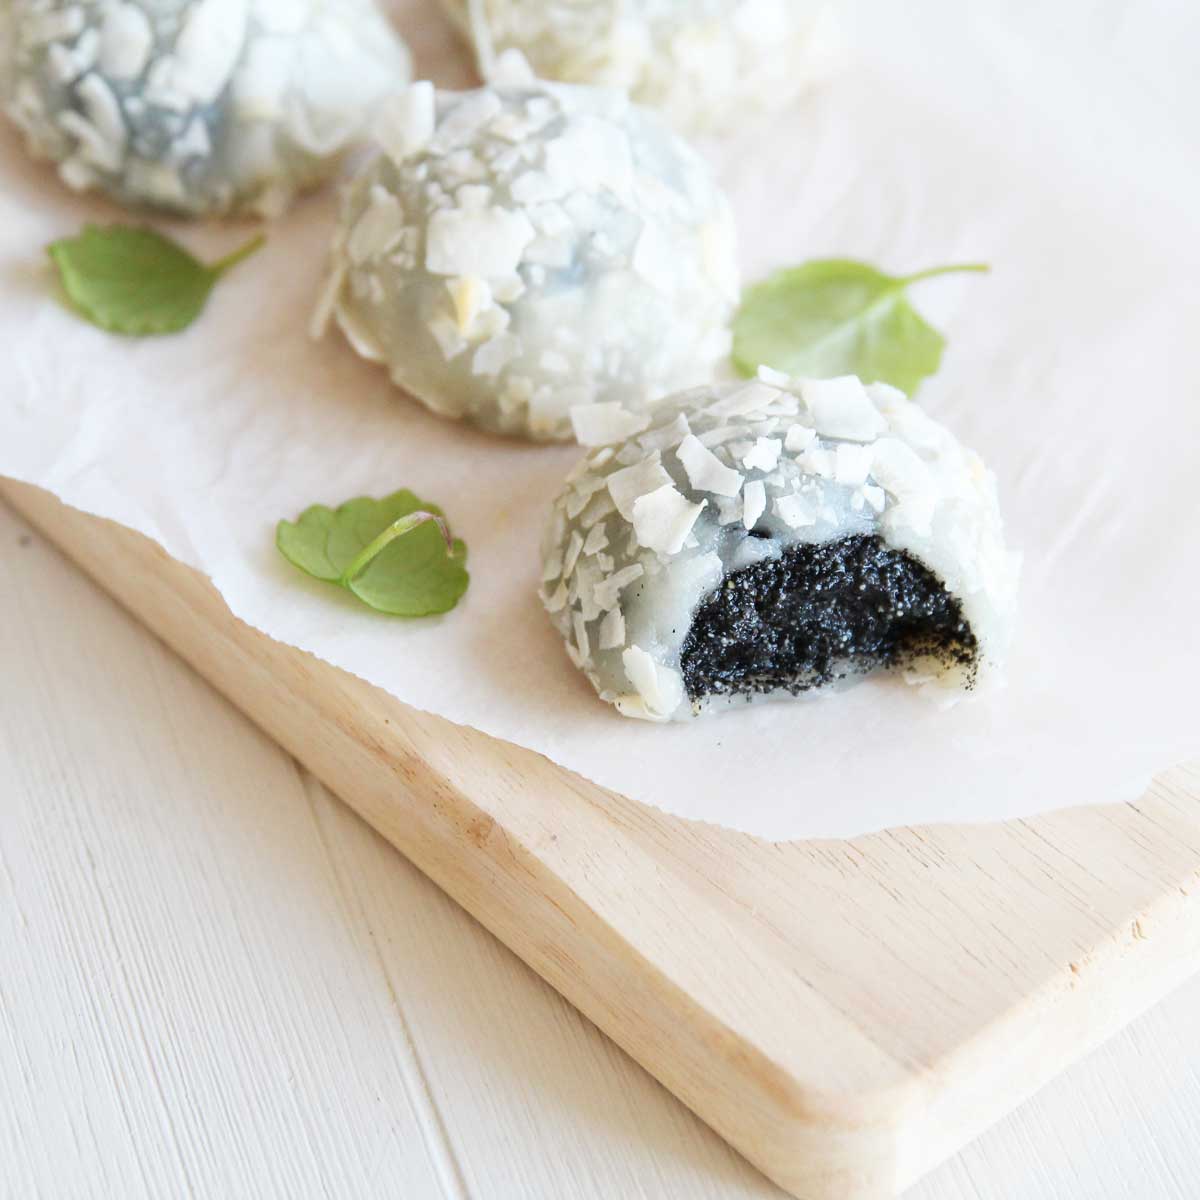 Easy Microwave Coconut Mochi with Black Sesame Filling - Banana Chocolate Mochi